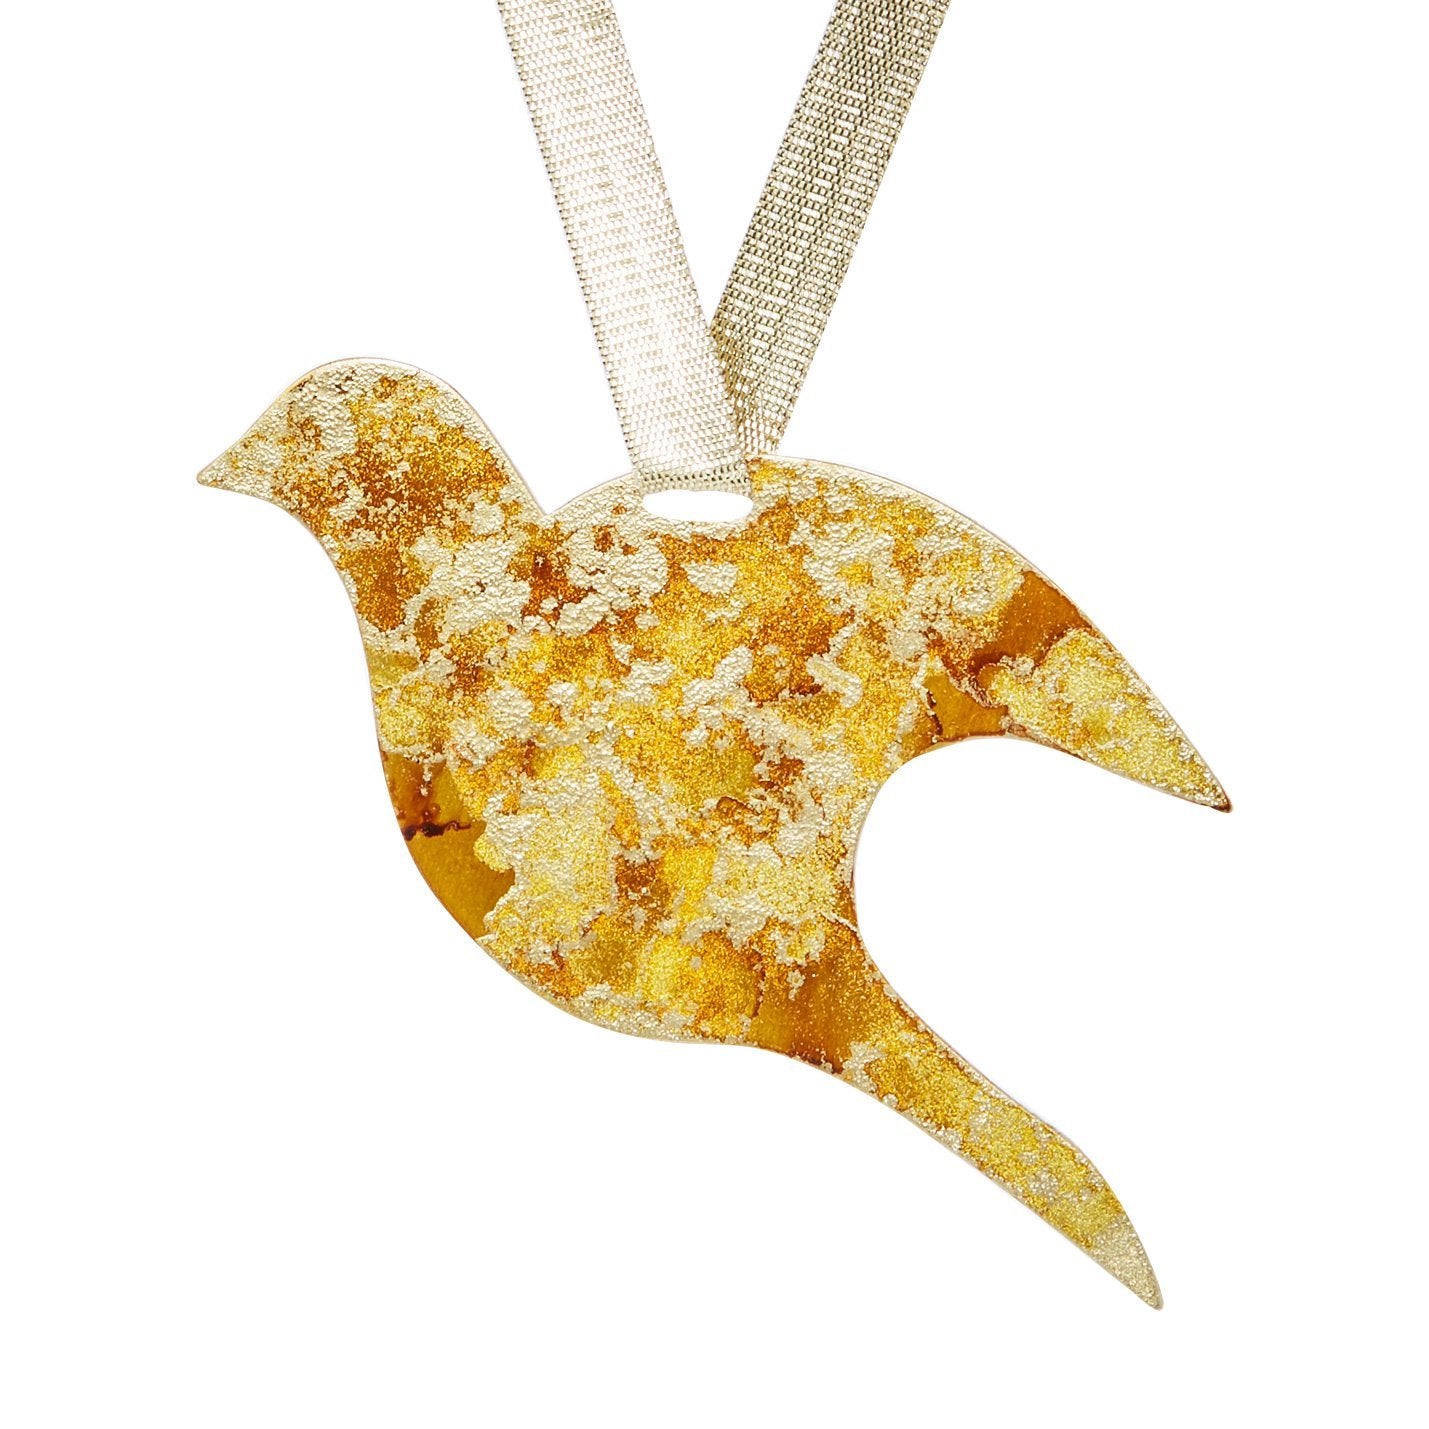 LindyLu Peace Dove Ornament - Available in More Colors